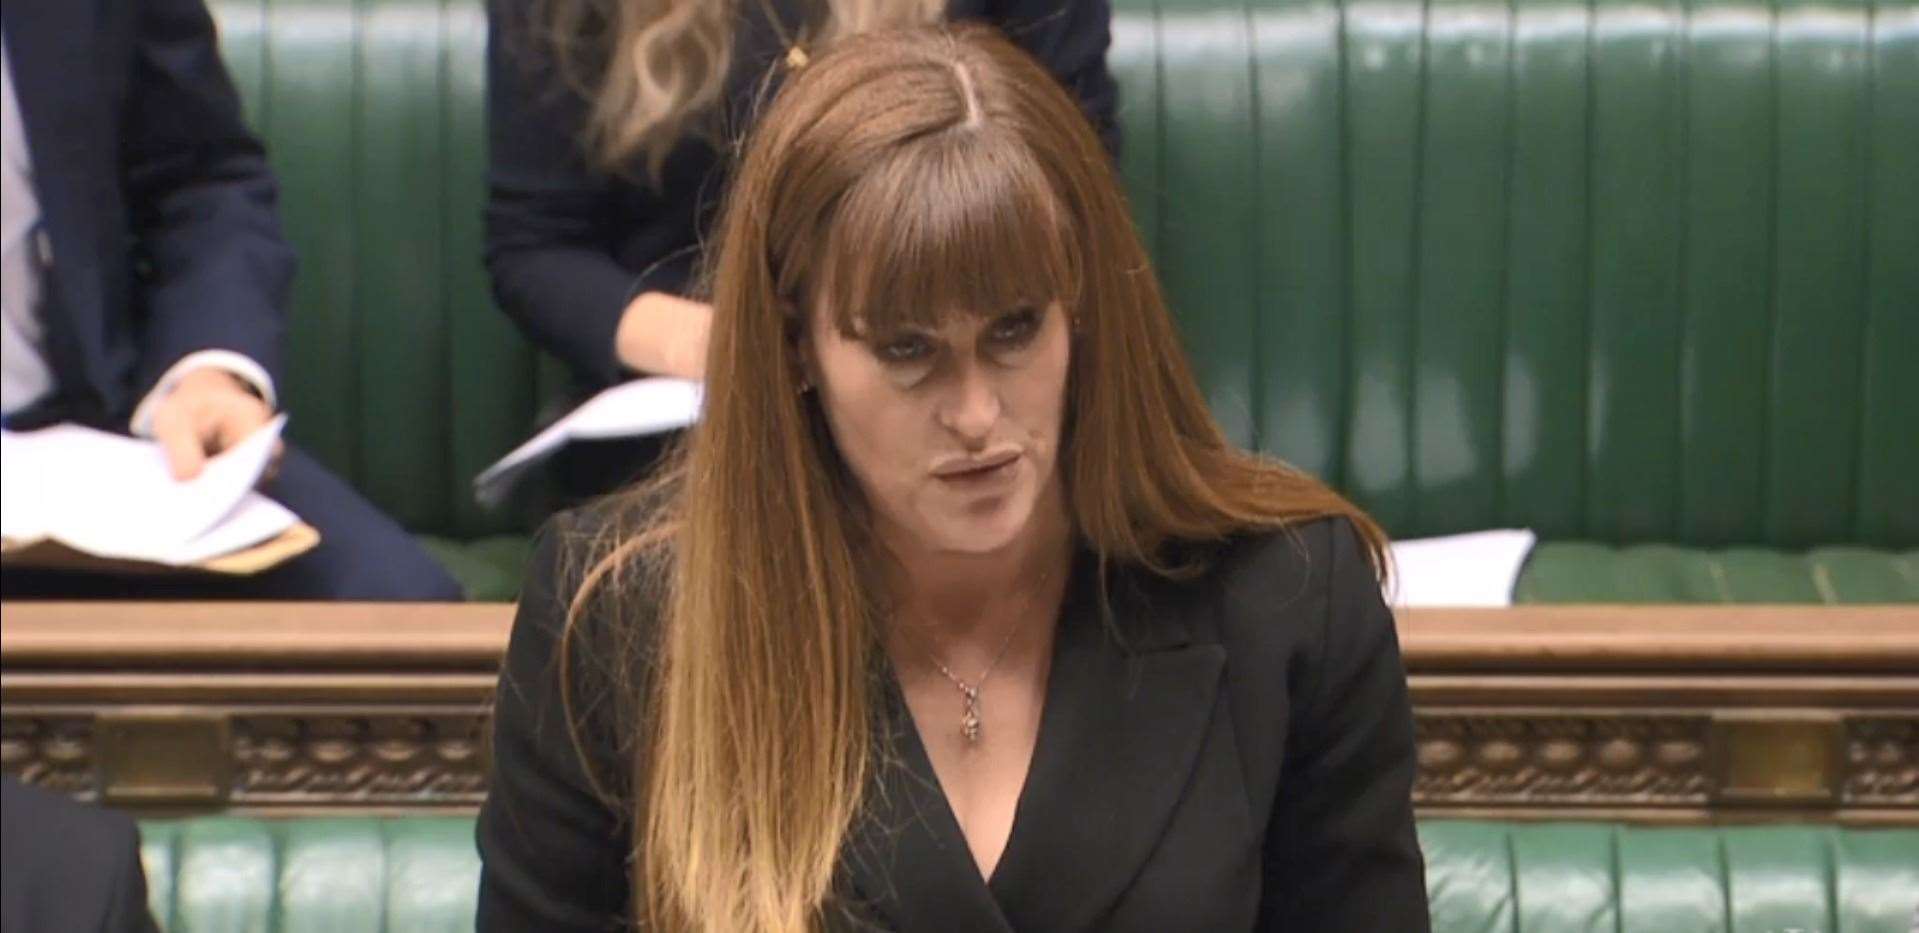 Kelly Tolhurst in the House of Commons. Picture: Parliamentlive.tv